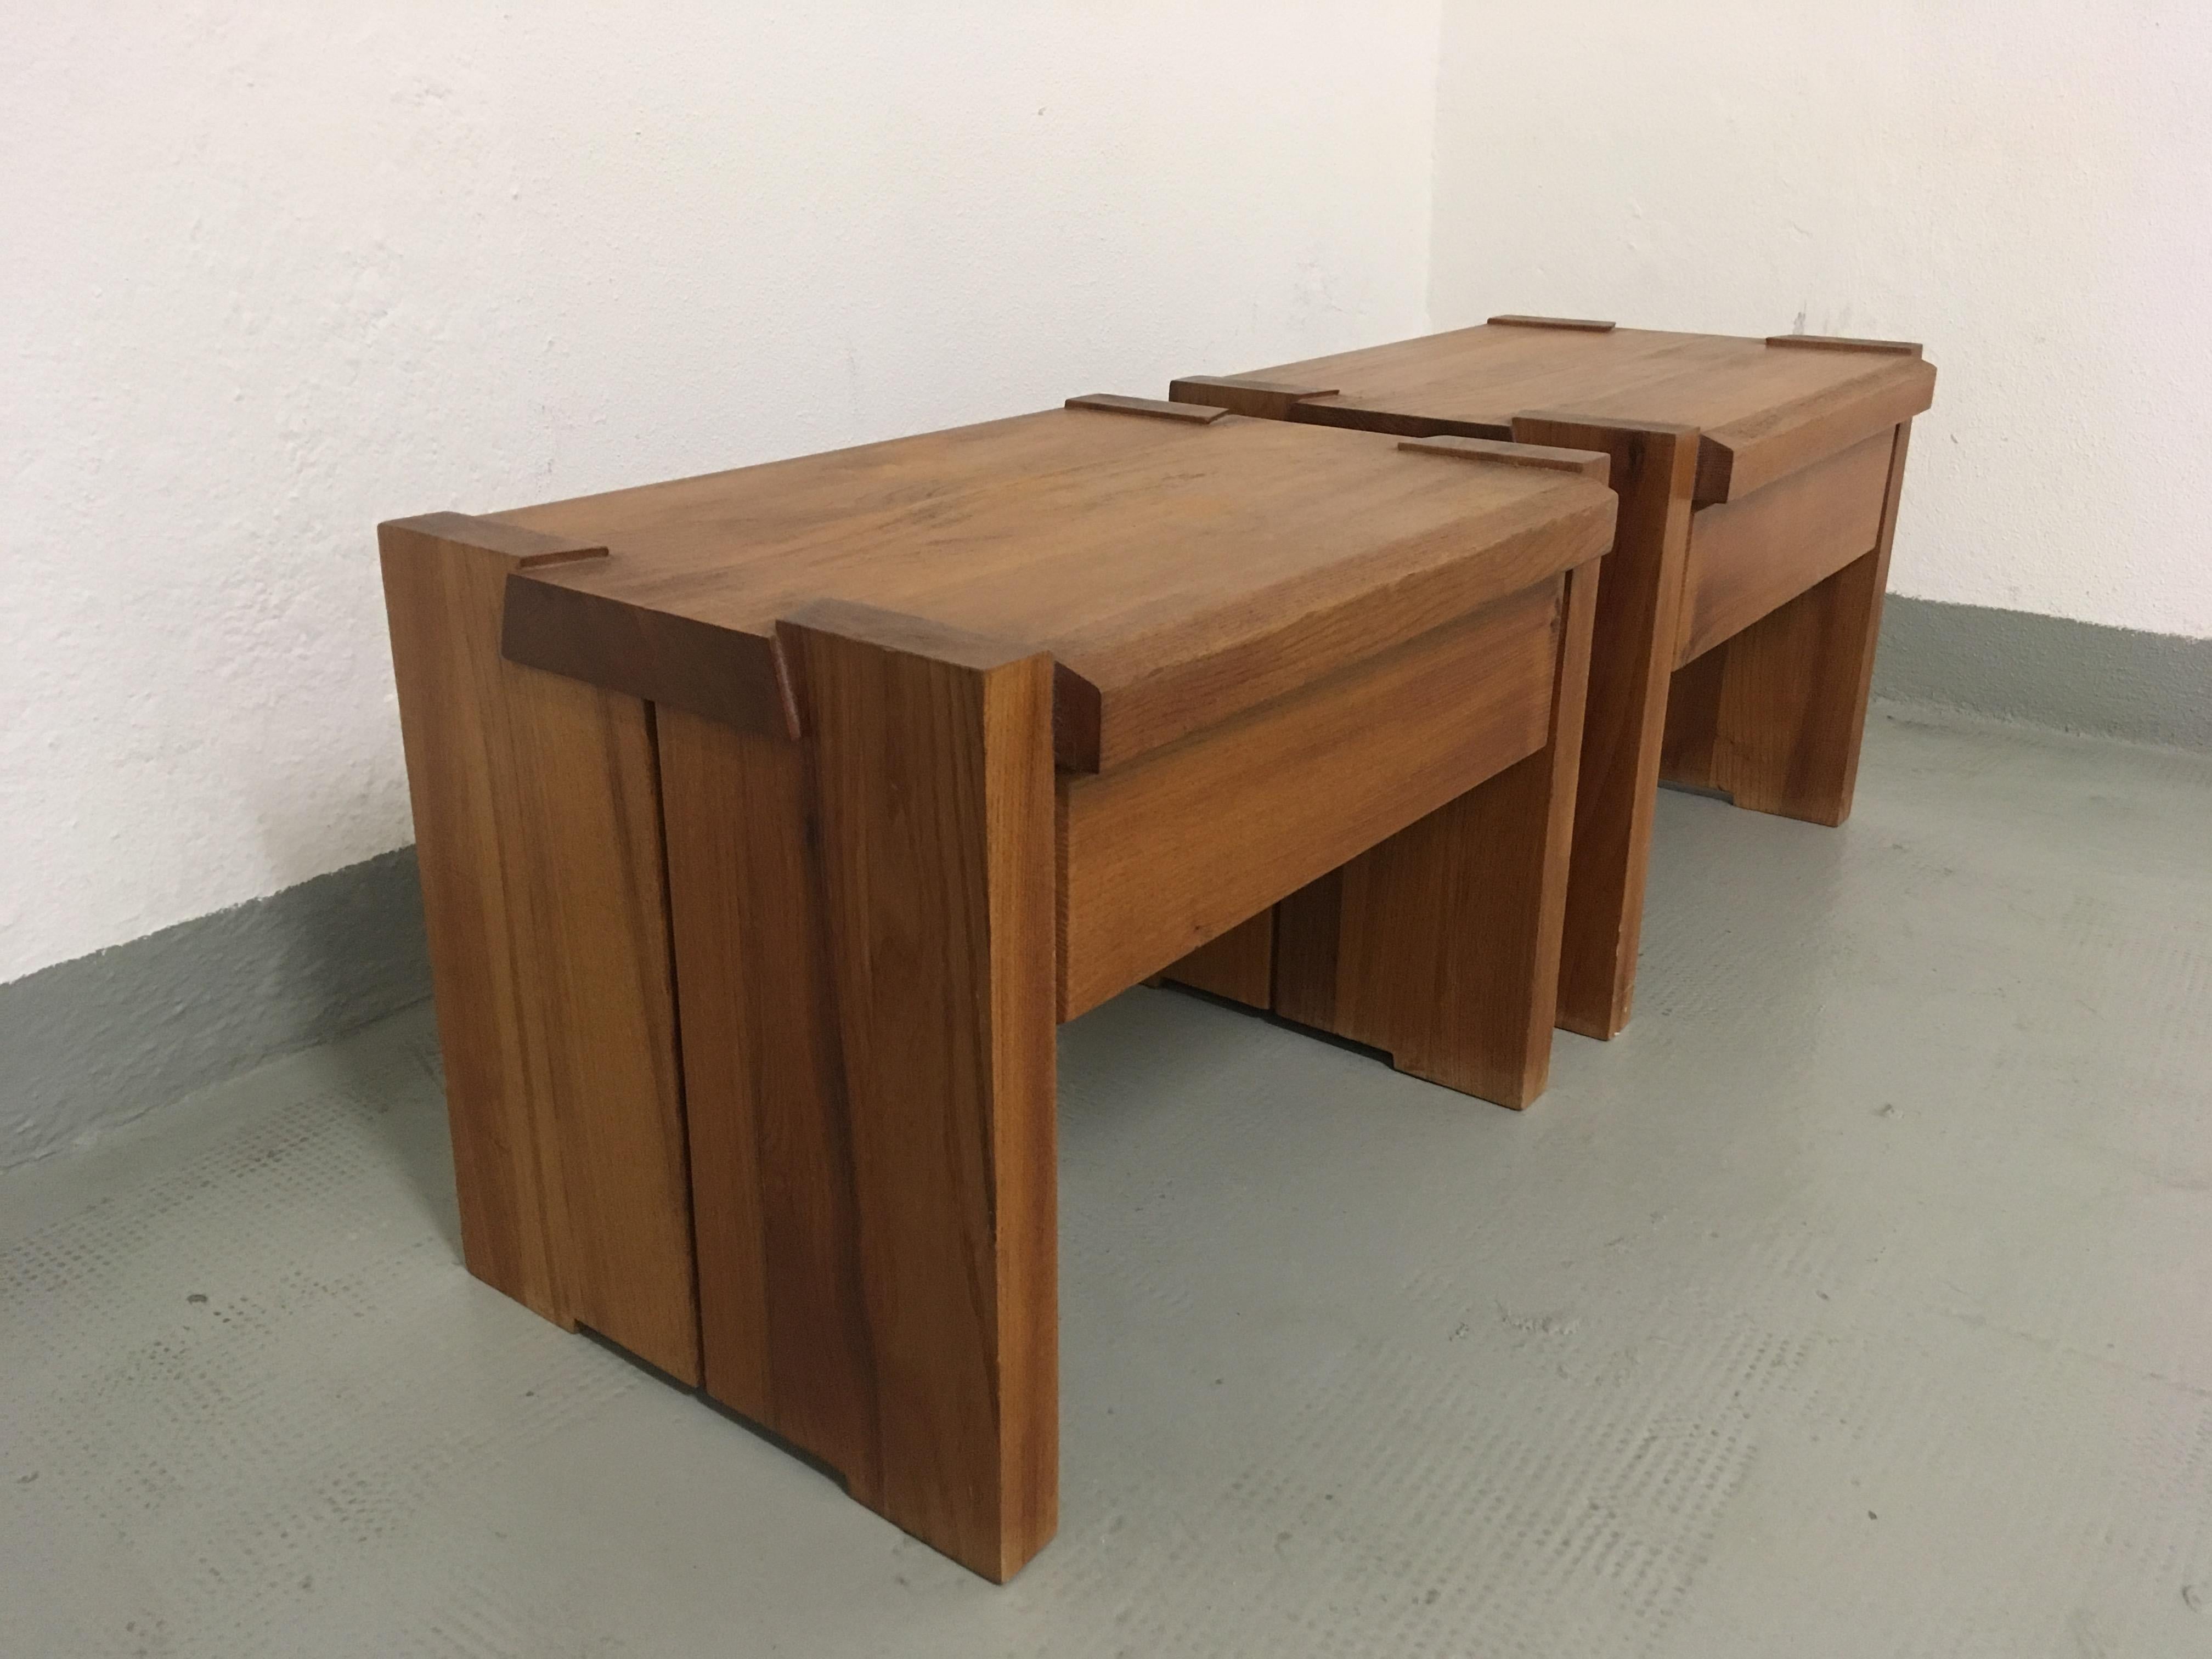 Pair of solid elm bedside or nightstands tables by Pierre Chapo, France, circa 1970
Very good condition, with patina.